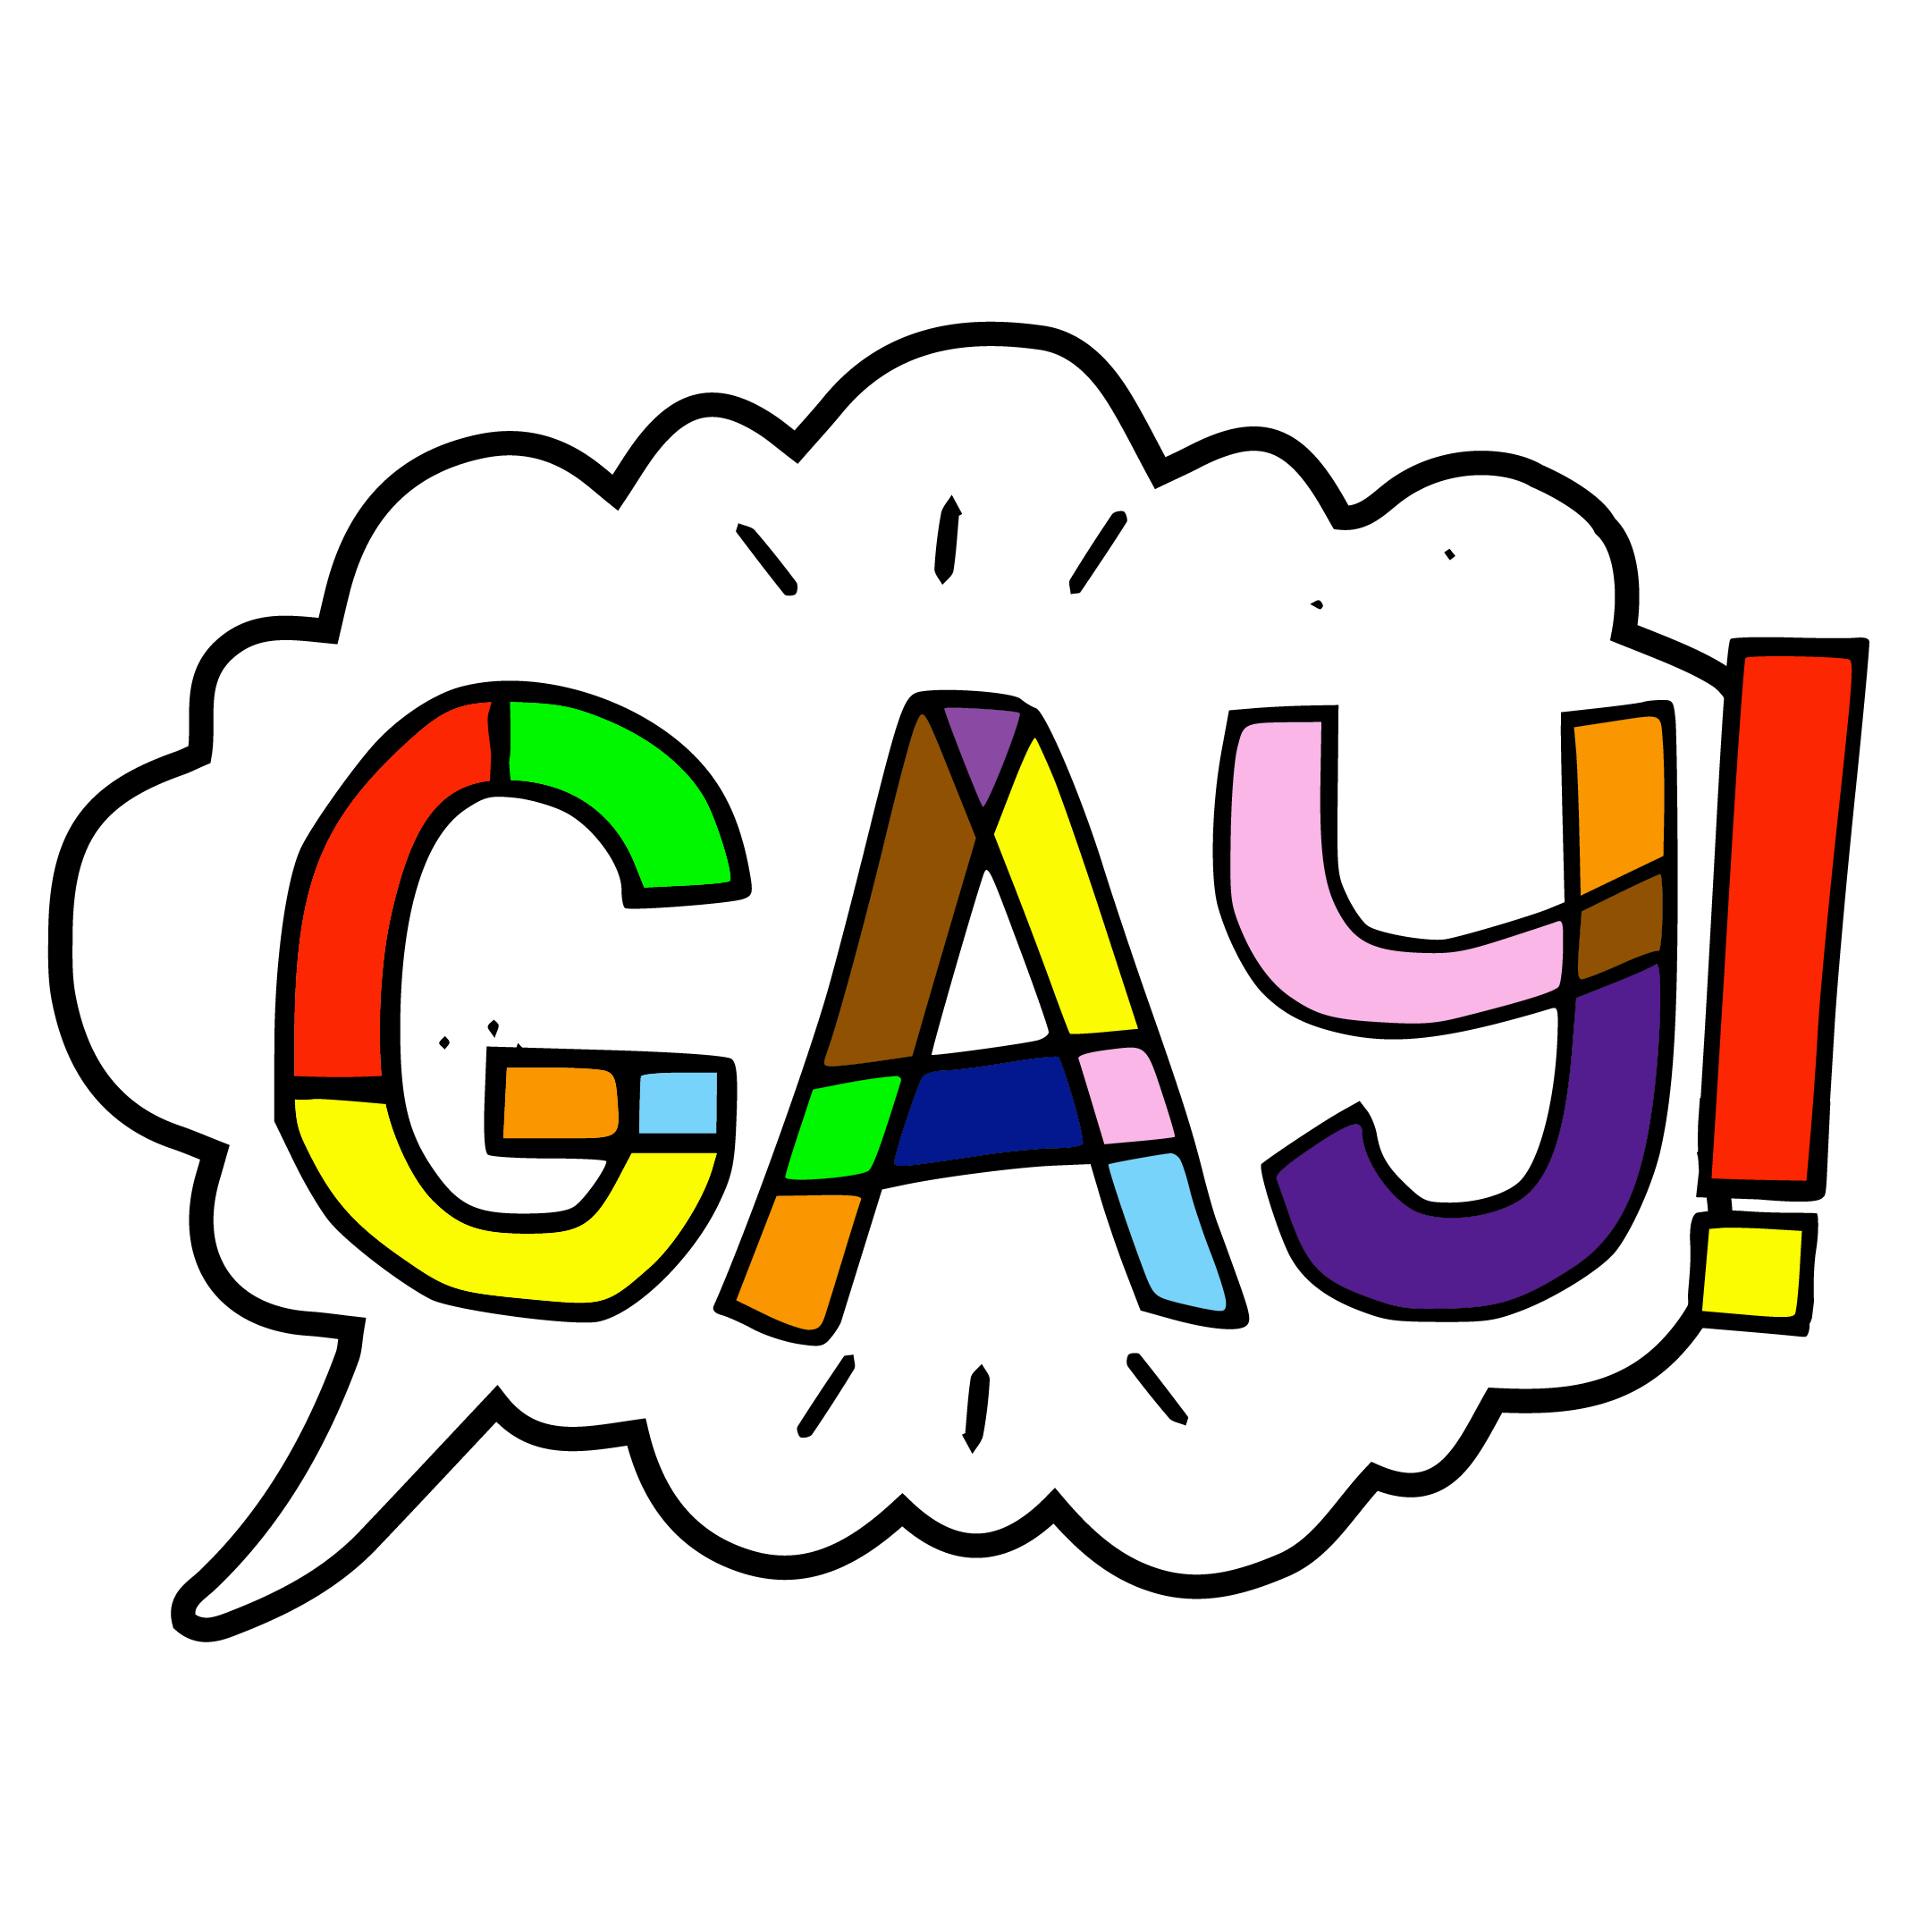 Every Day, Say 'Gay'!